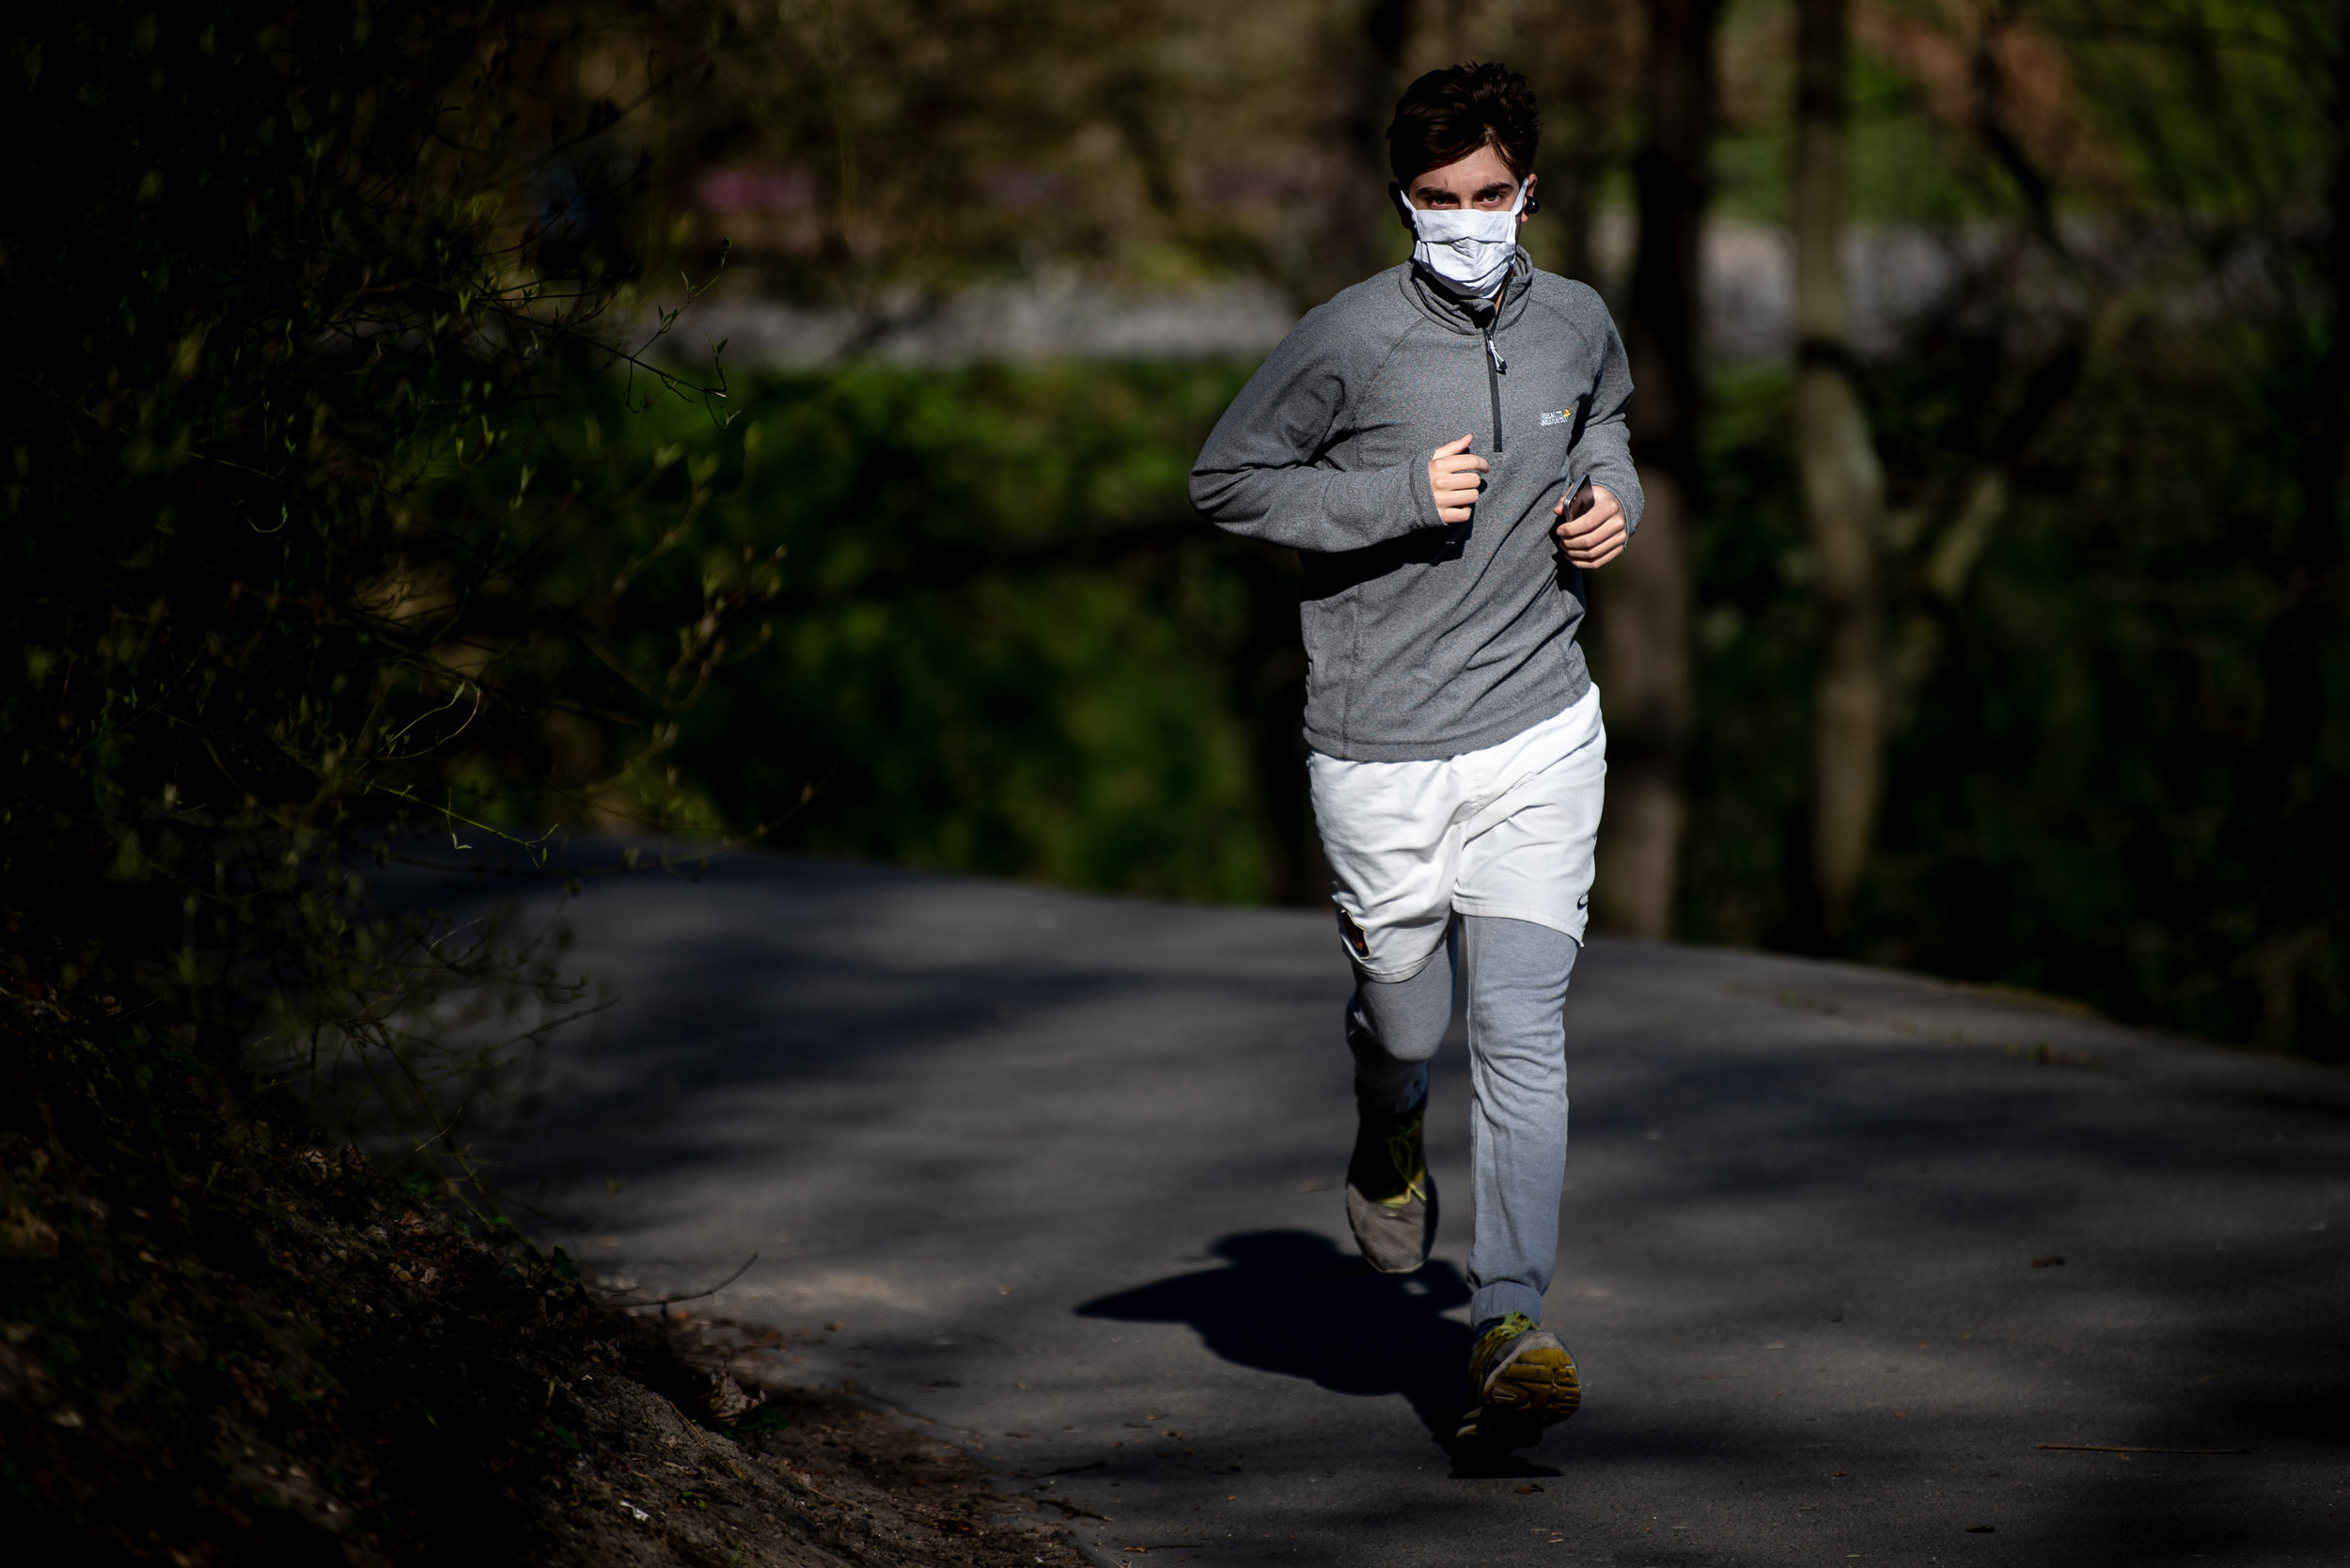 How Pandemic-Related Stress May Be Impacting Your Runs